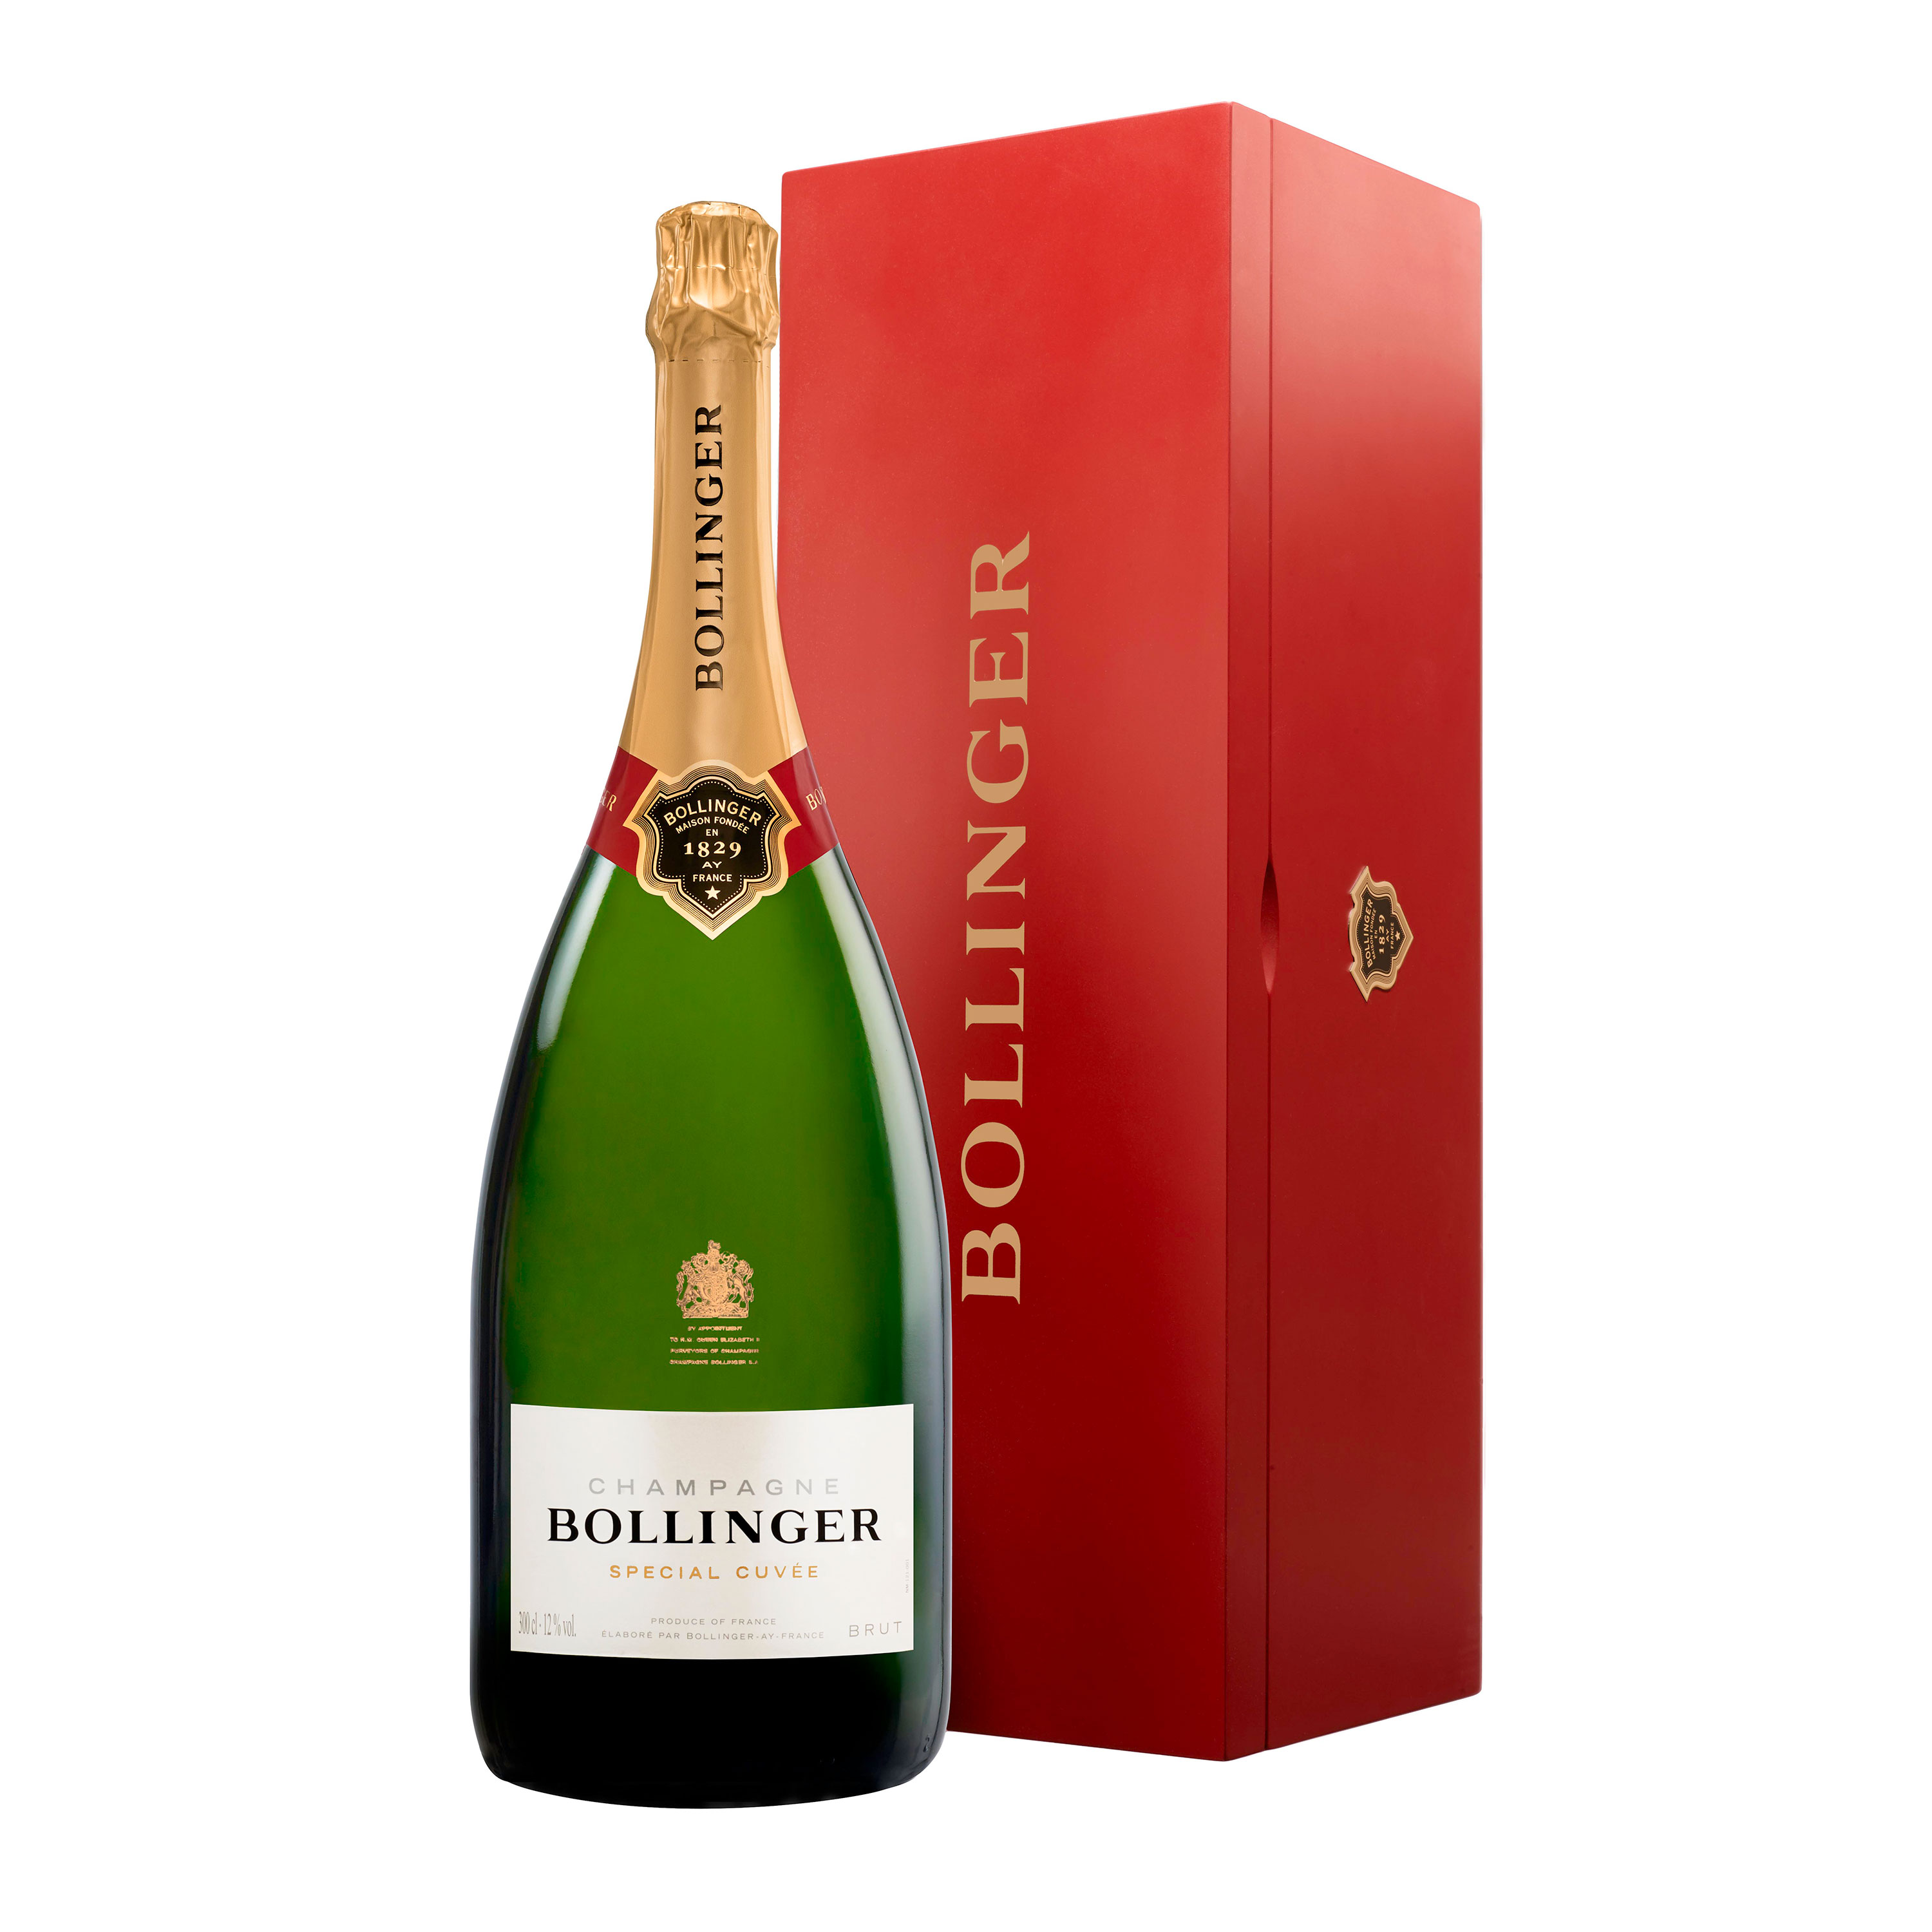 Buy And Send Jeroboam of Bollinger Special Cuvee, NV, Champagne Gift Online